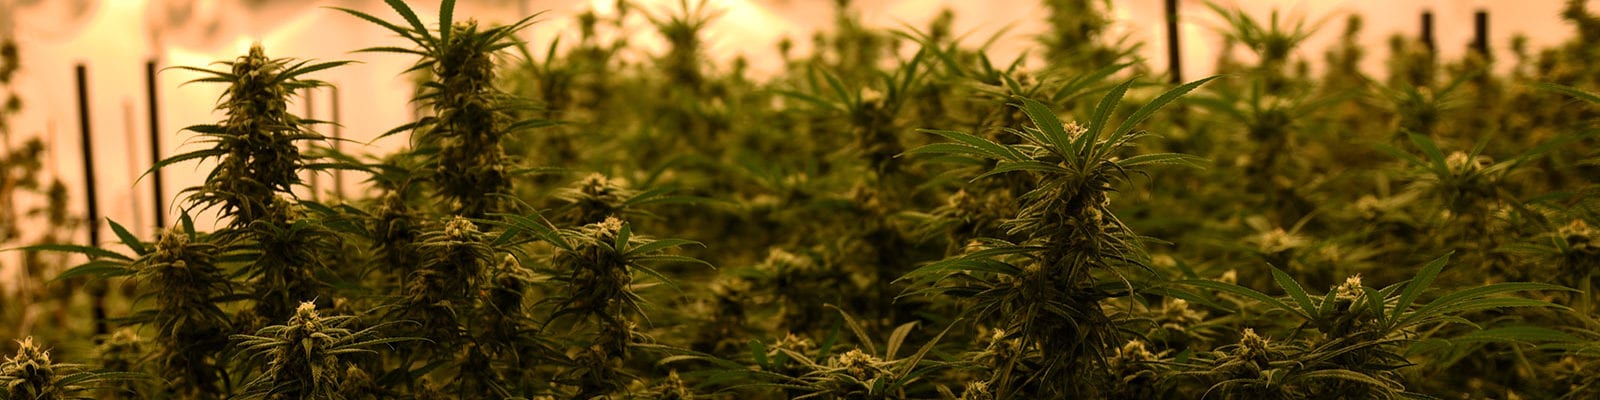 An indoor cannabis crop in a licensed cannabis cultivation site in Washington state.